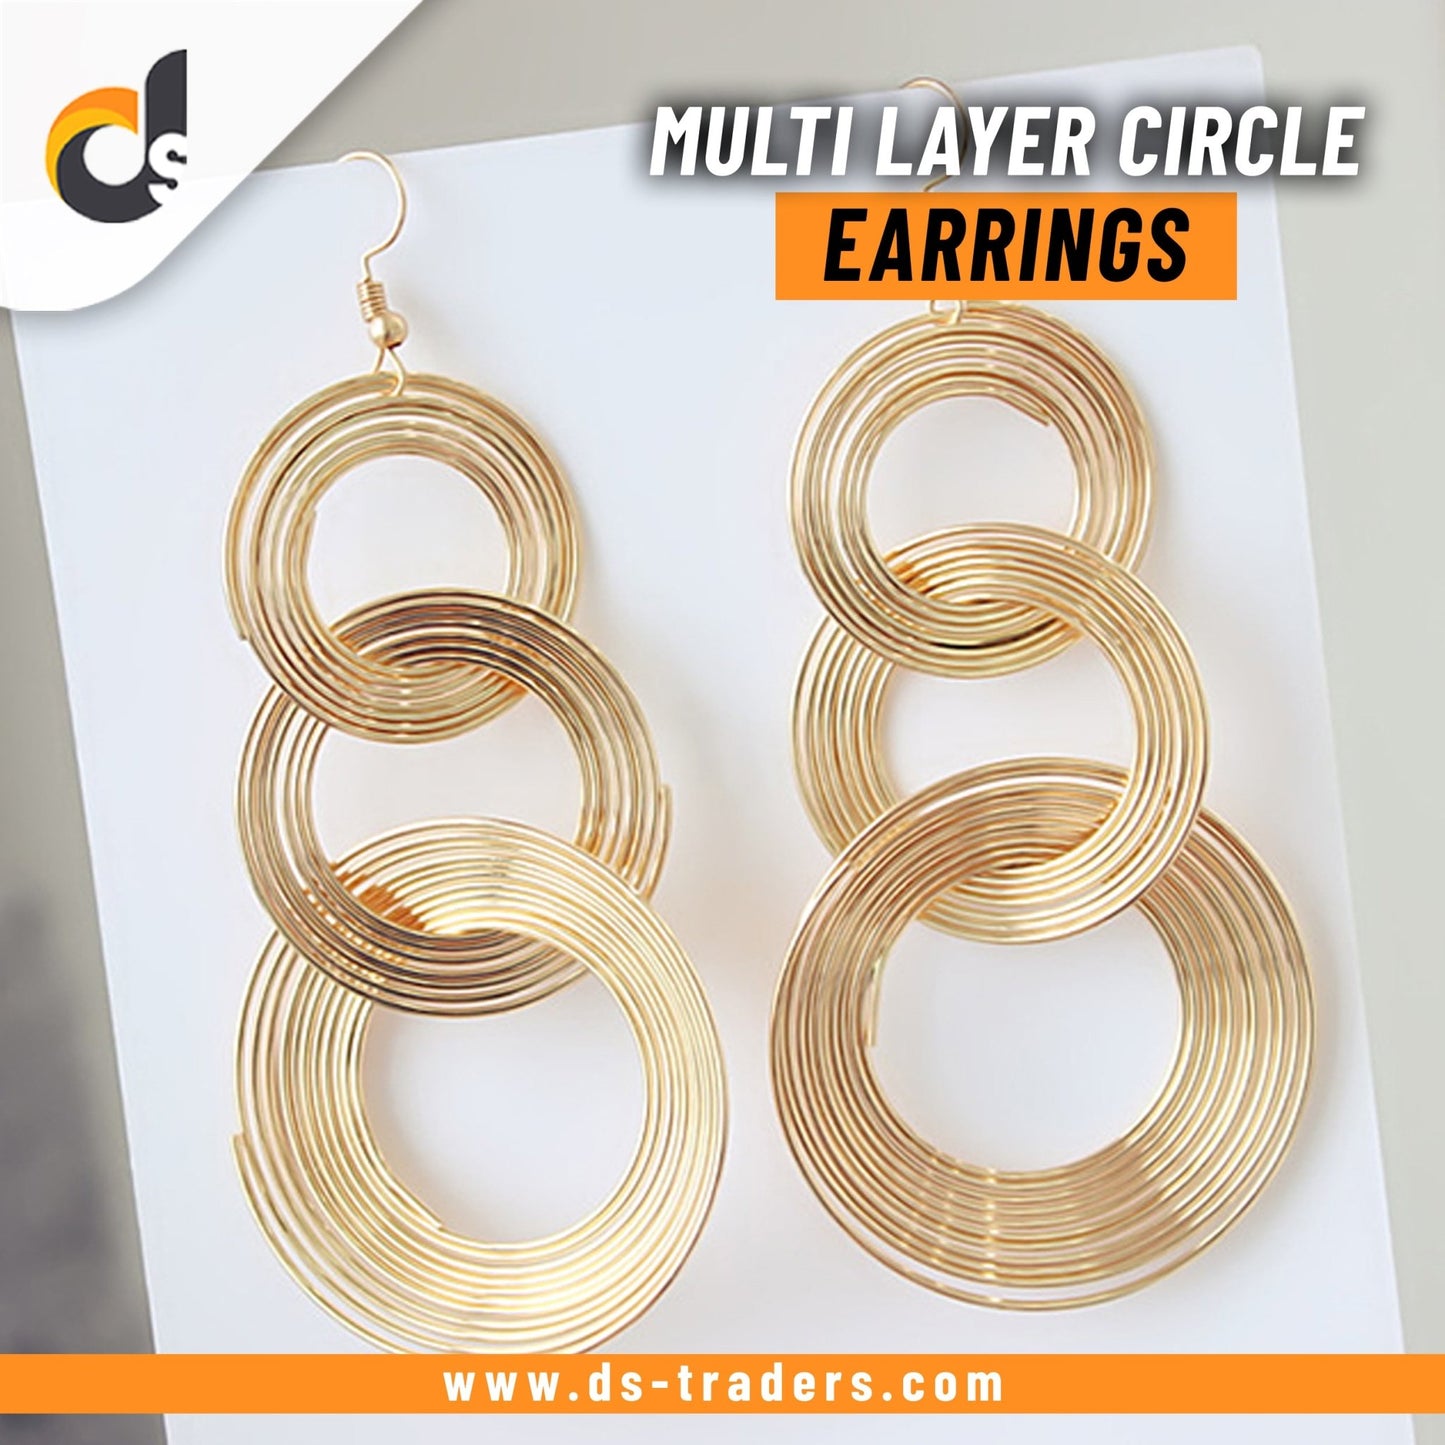 Multi Layer Circle Earrings - DS Traders